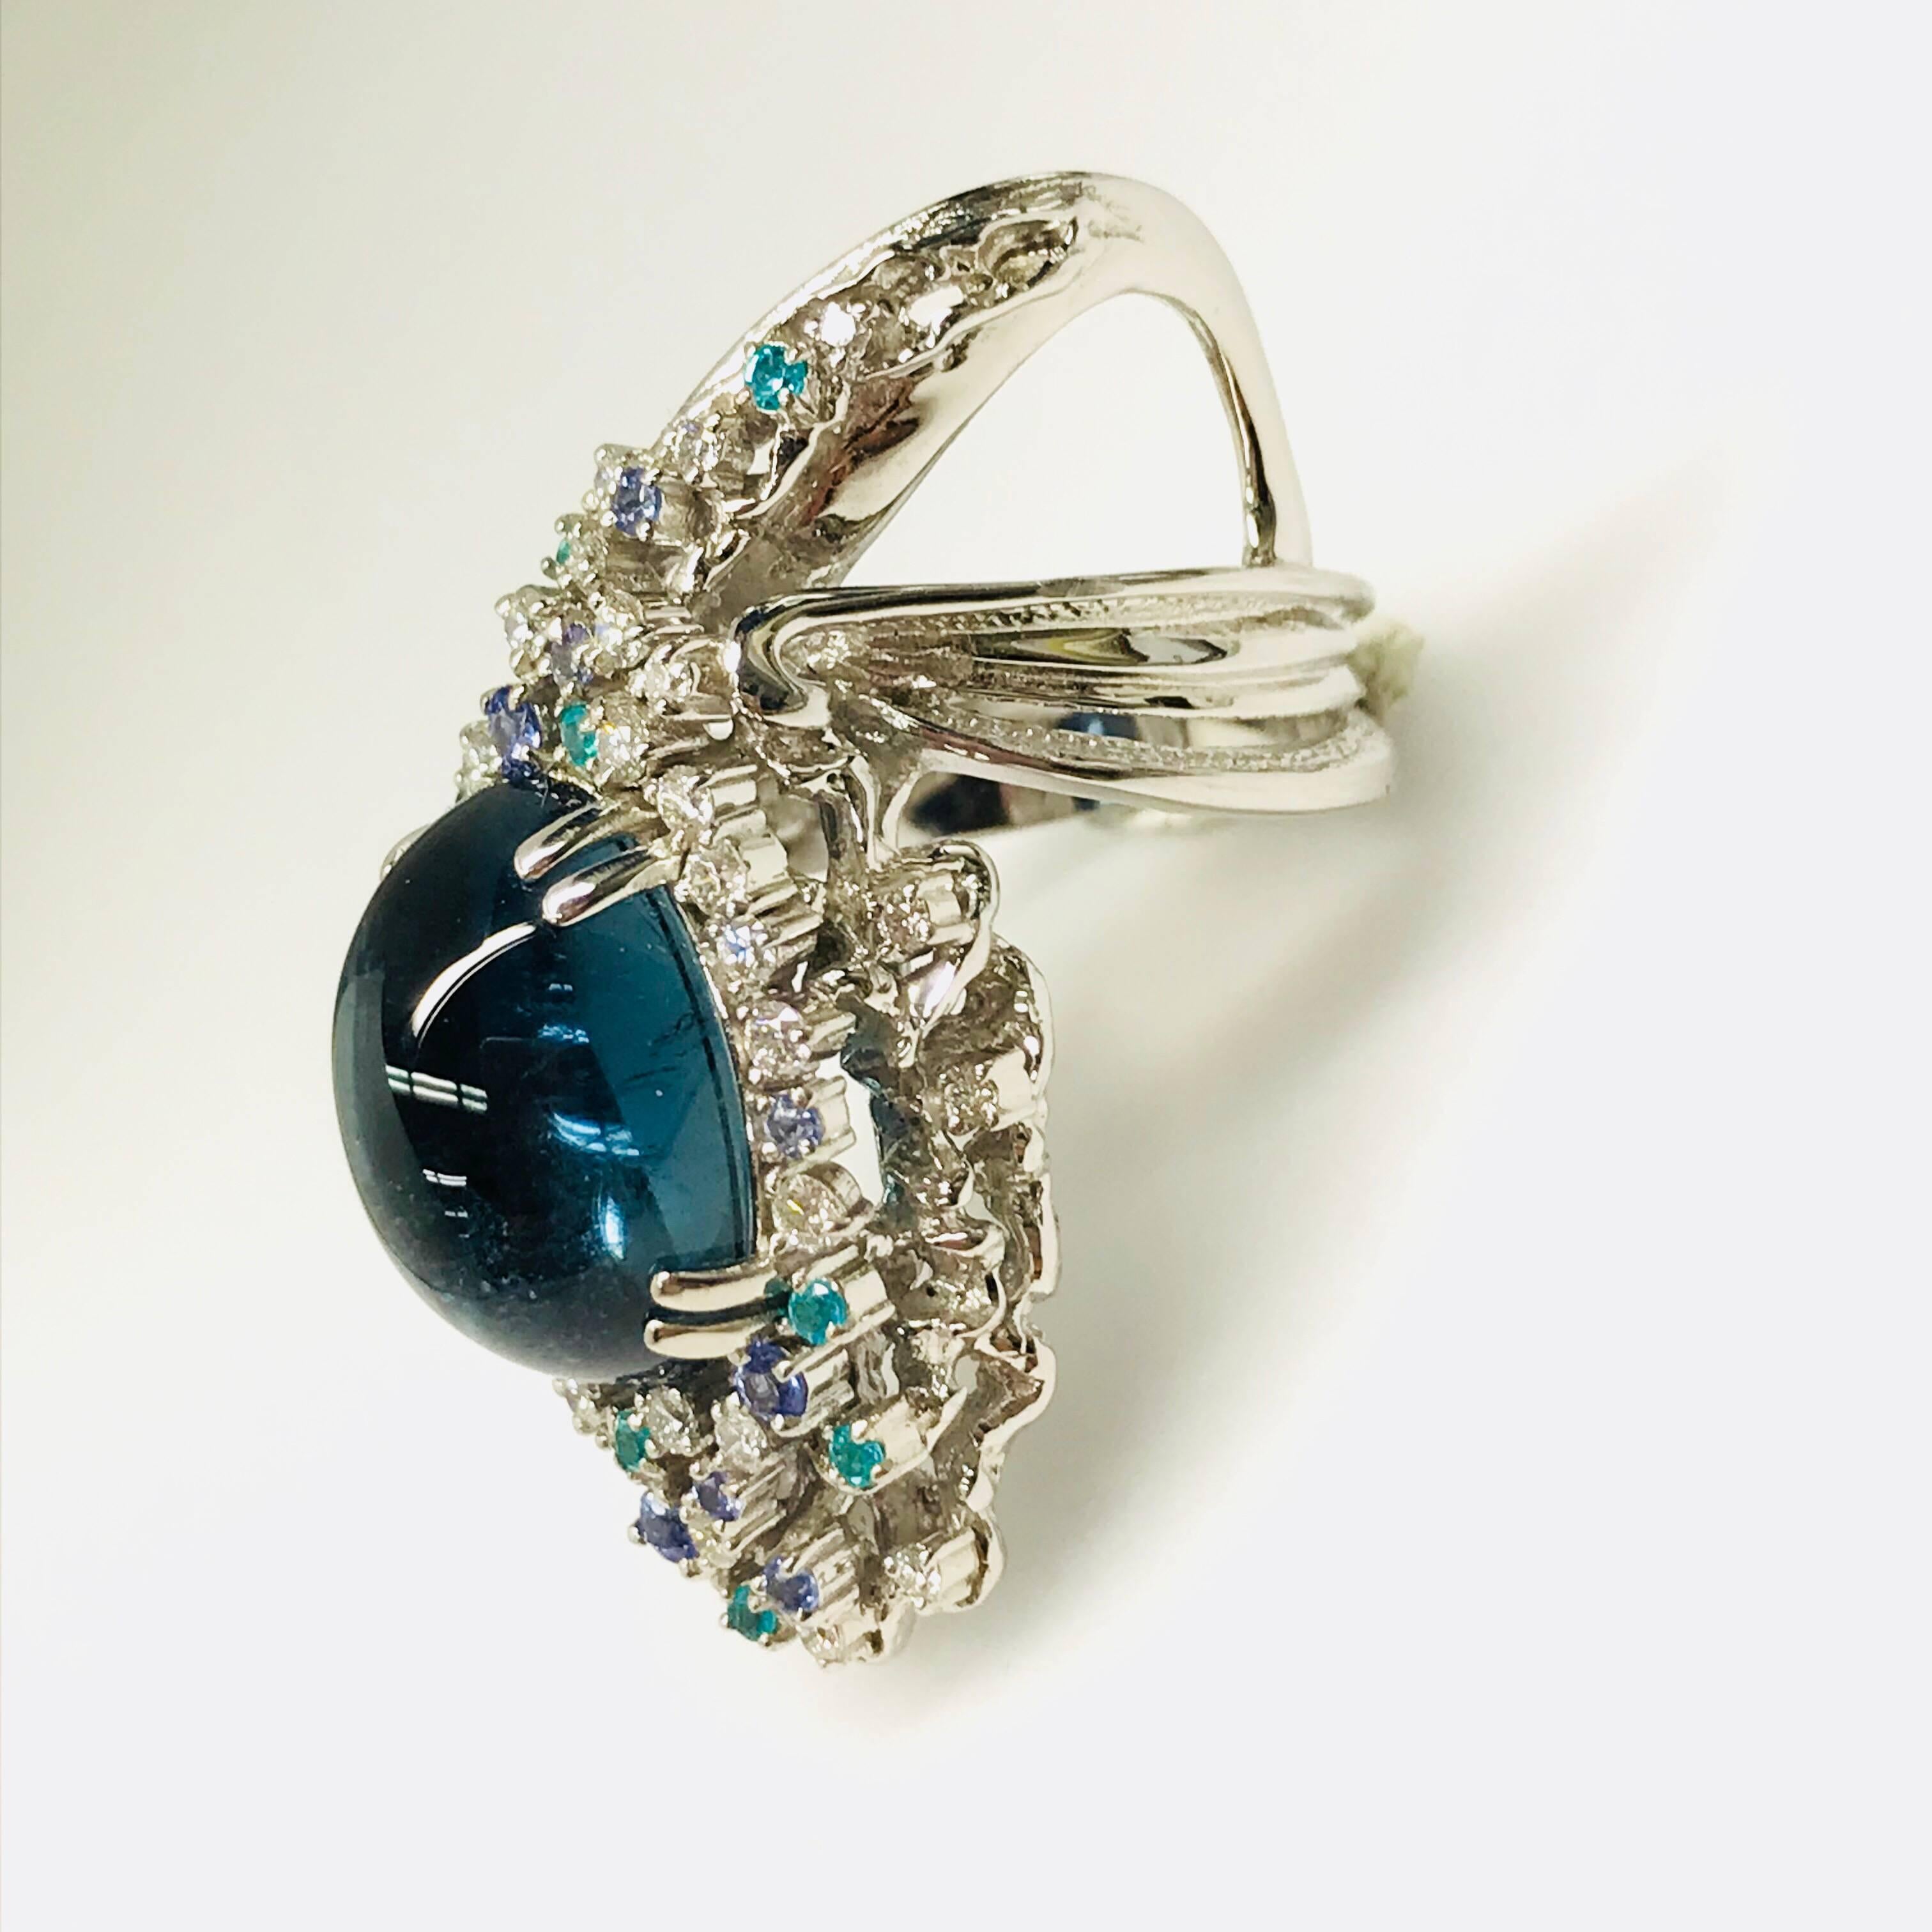 All buyers outside of Japan will receive -10% tax exemption from the list price. Please inquire for details.
Indigo Tourmaline : 10.98ct / Tanzanite (Zoisite) : 0.30ct 
Paraiba Tourmaline : 0.13ct / Diamonds : 0.59ct 
Approximate Size of the center